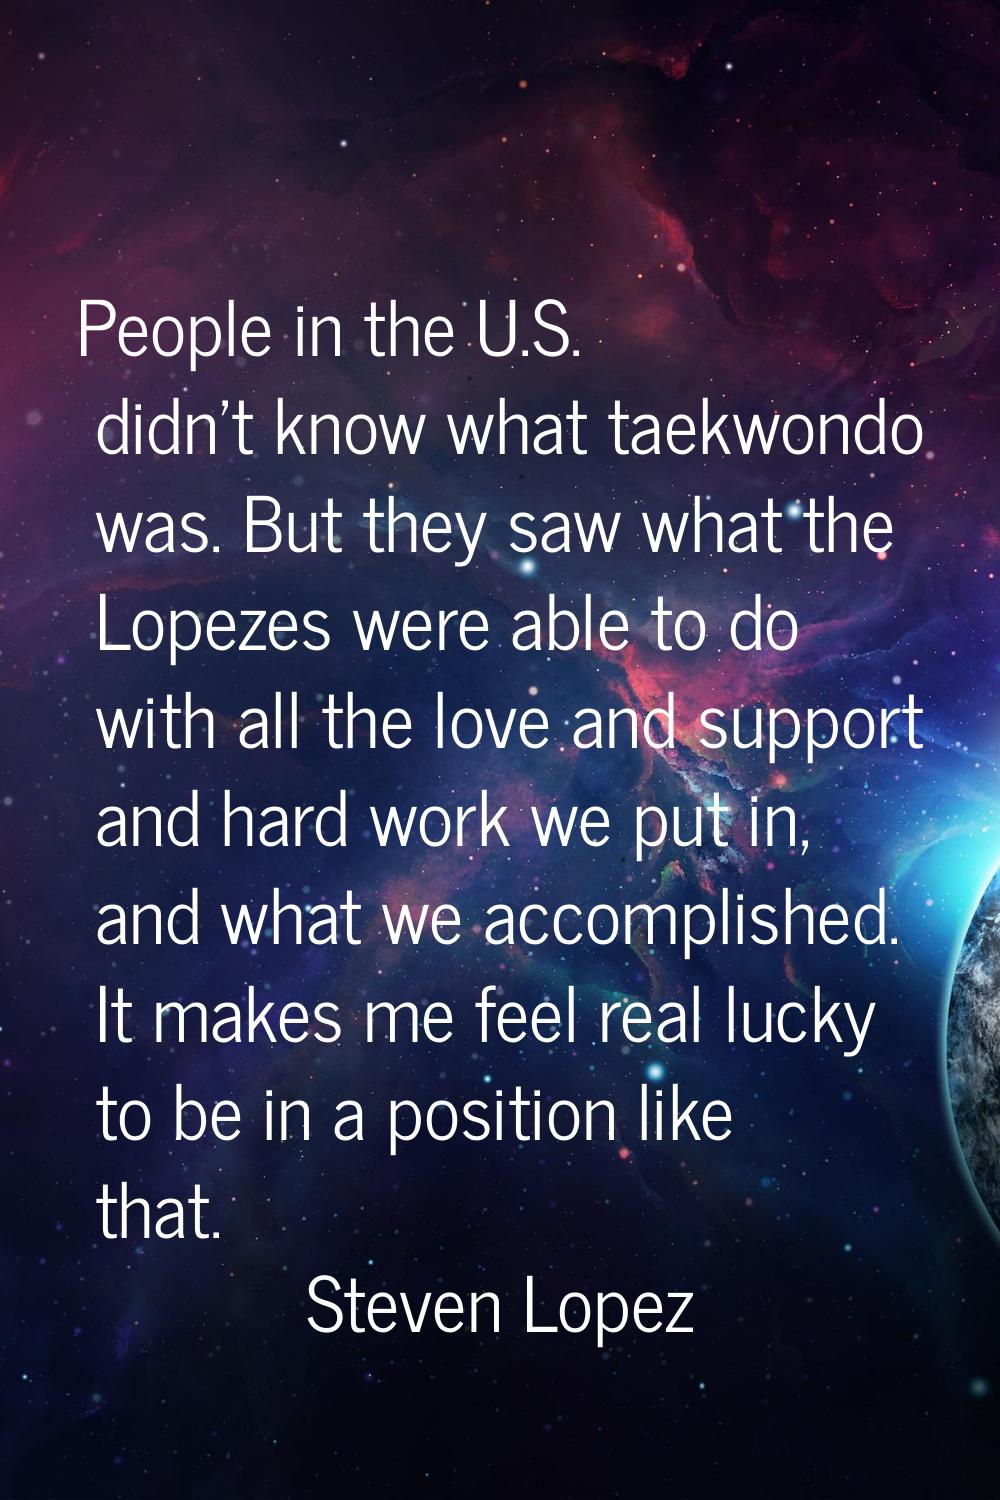 People in the U.S. didn't know what taekwondo was. But they saw what the Lopezes were able to do wi